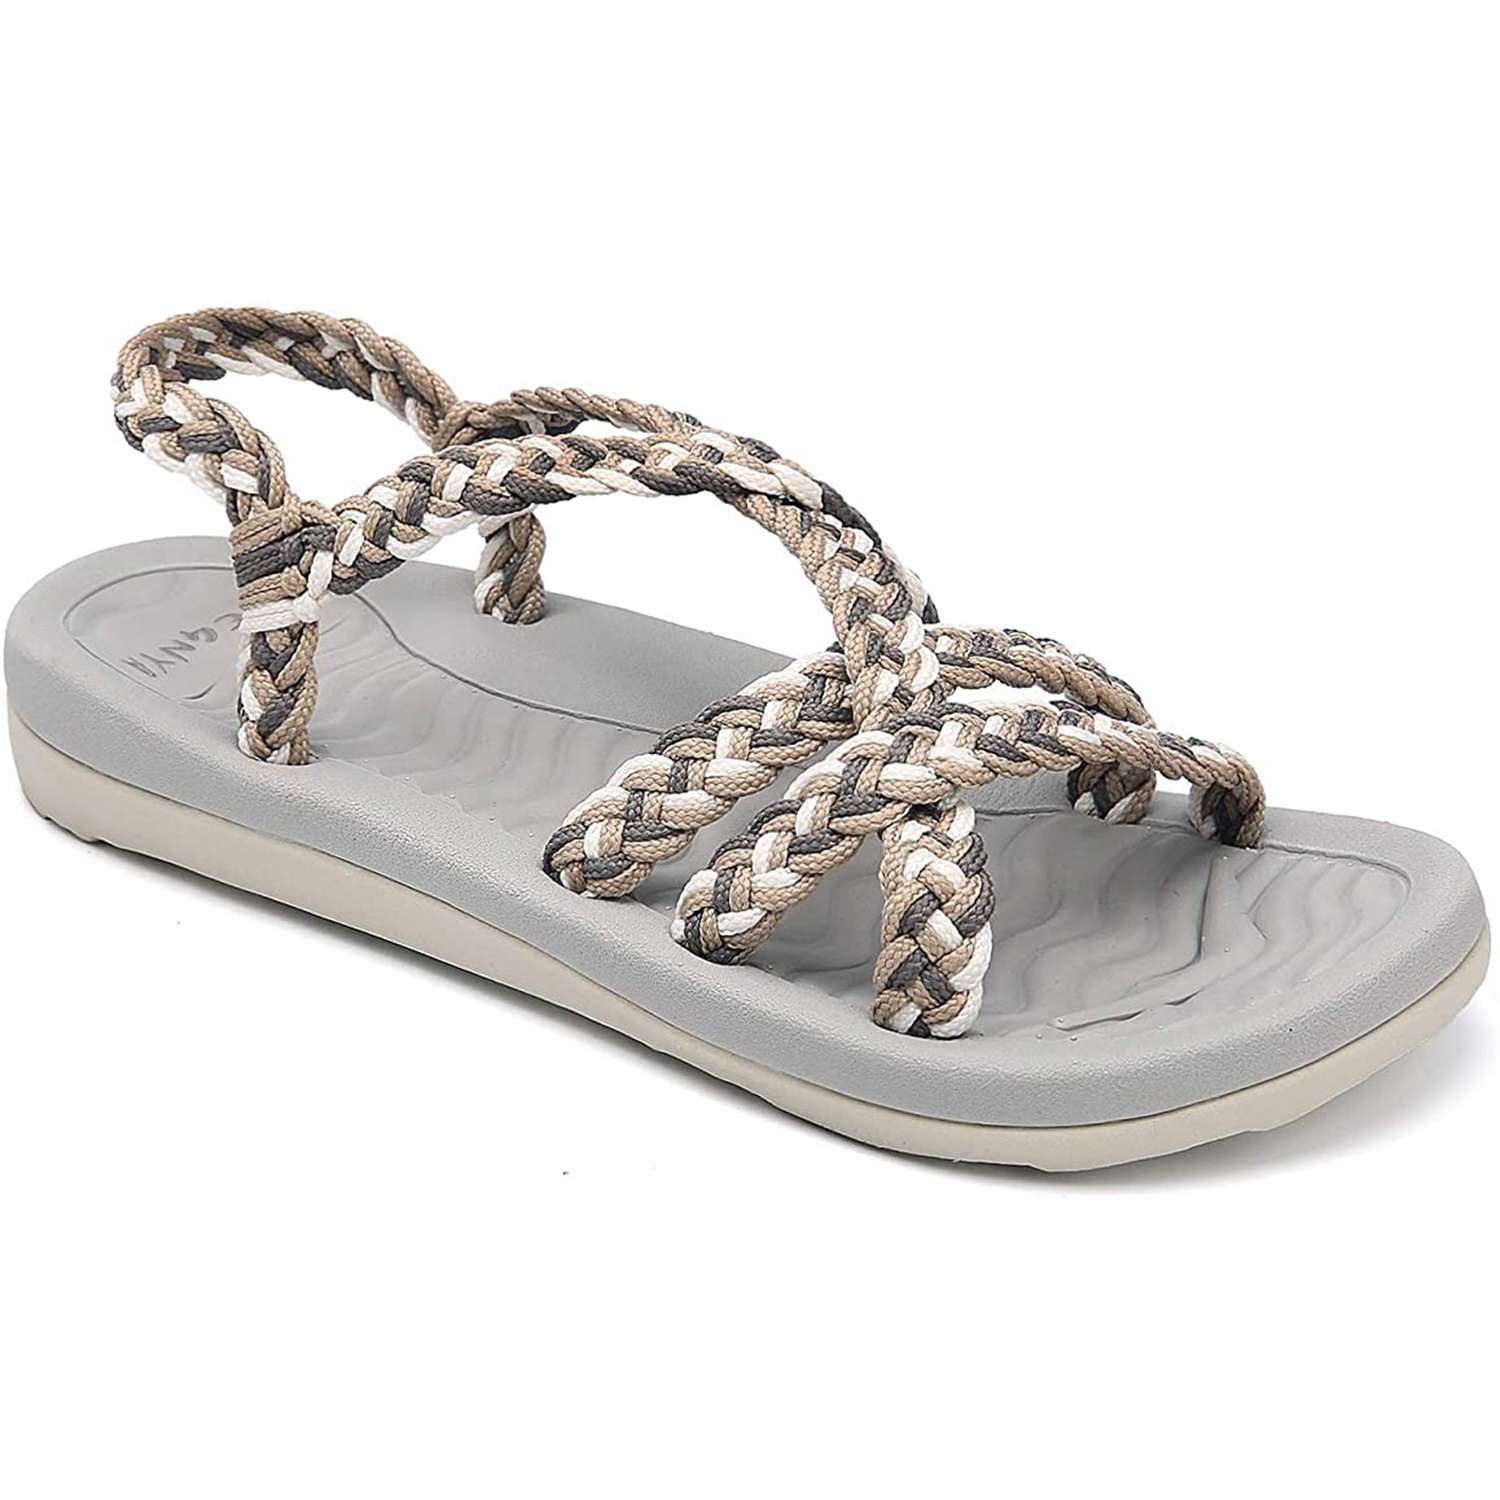 The Megnya Walking Sandals Have Comfortable Features like Arch Support ...